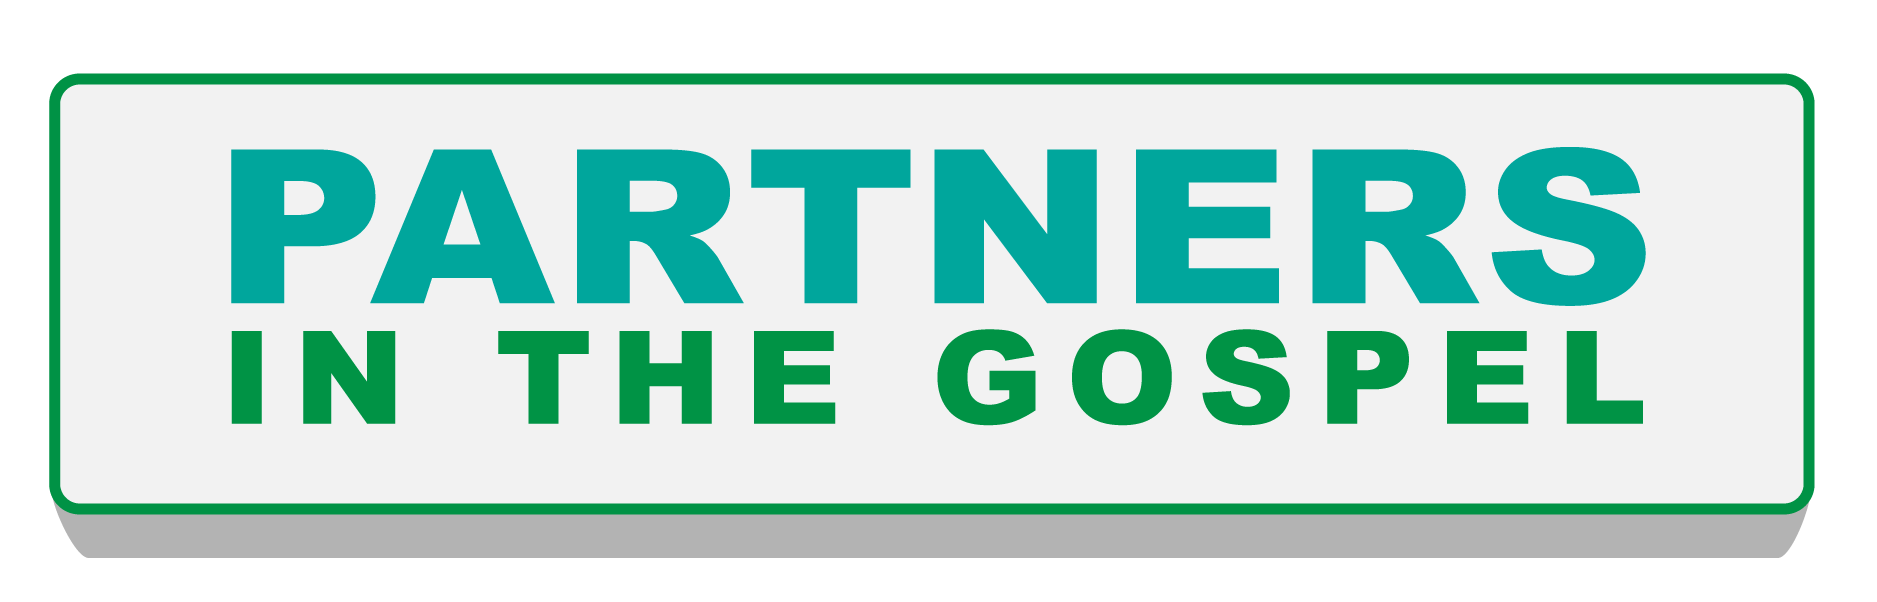 Link button to Seattle Archdiocese of Seattle Partners in the Gospel webpage